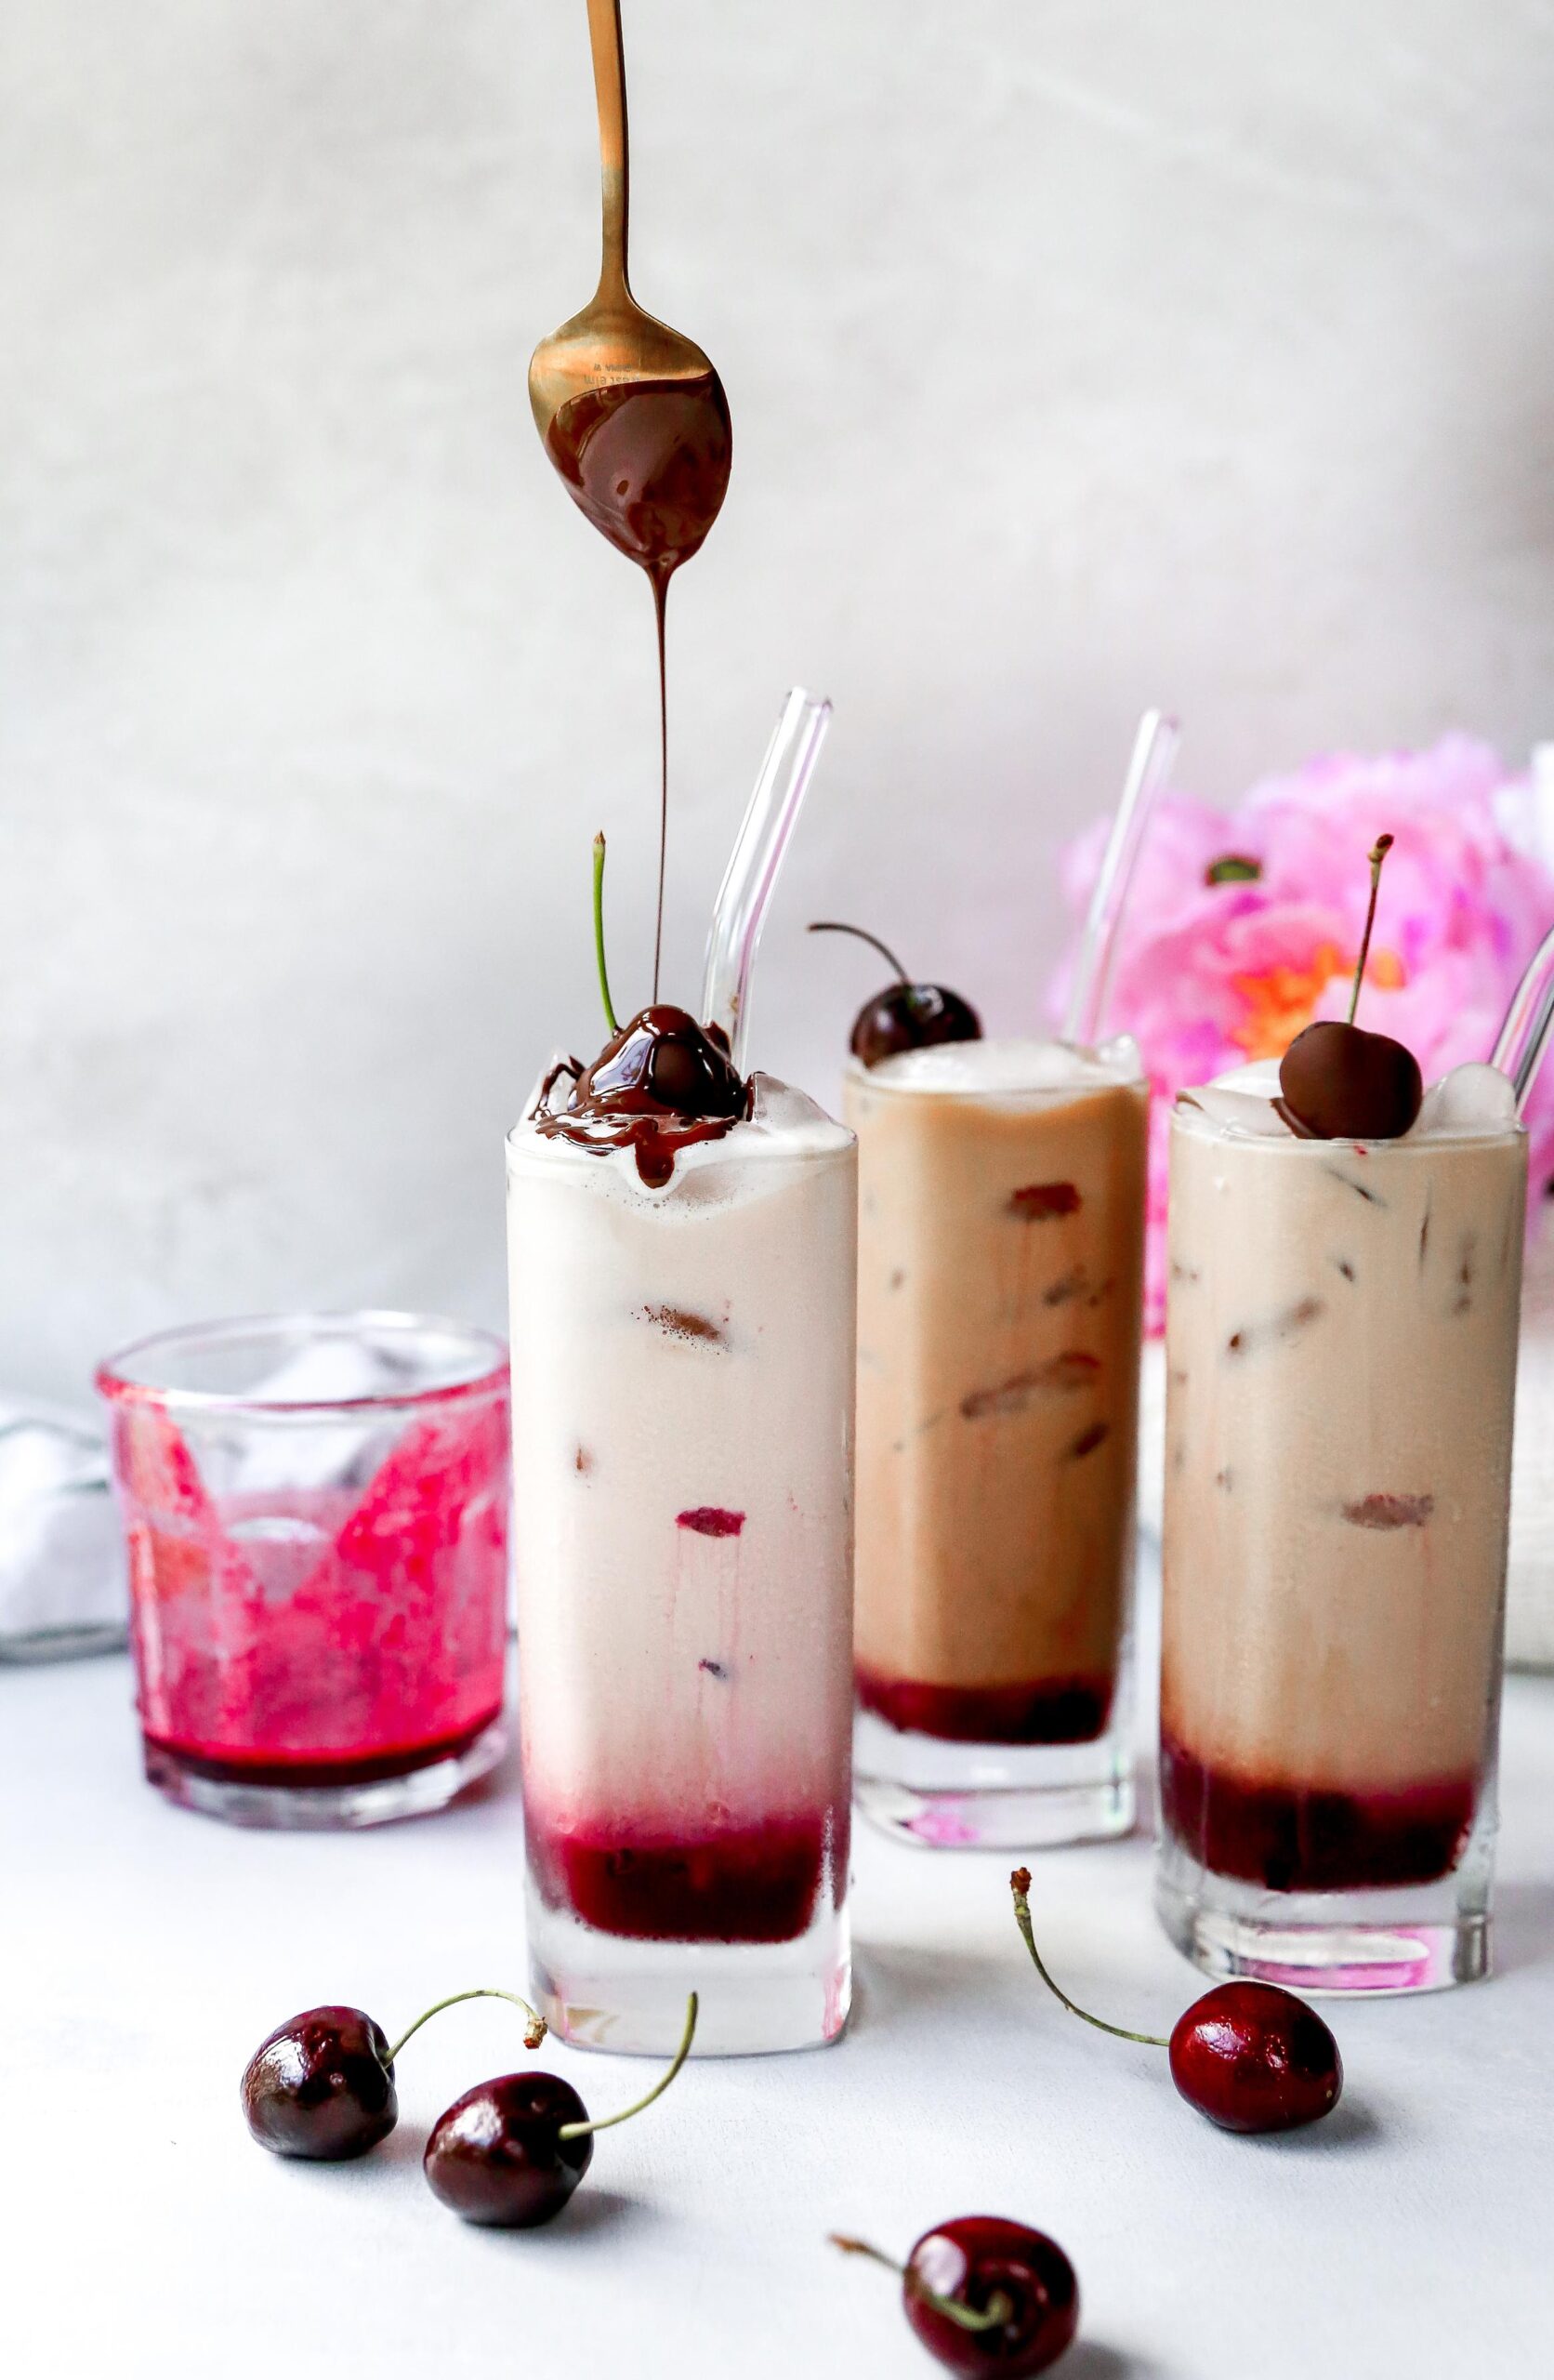  A playful combination of dark cocoa, freshly brewed coffee, and cherry syrup.